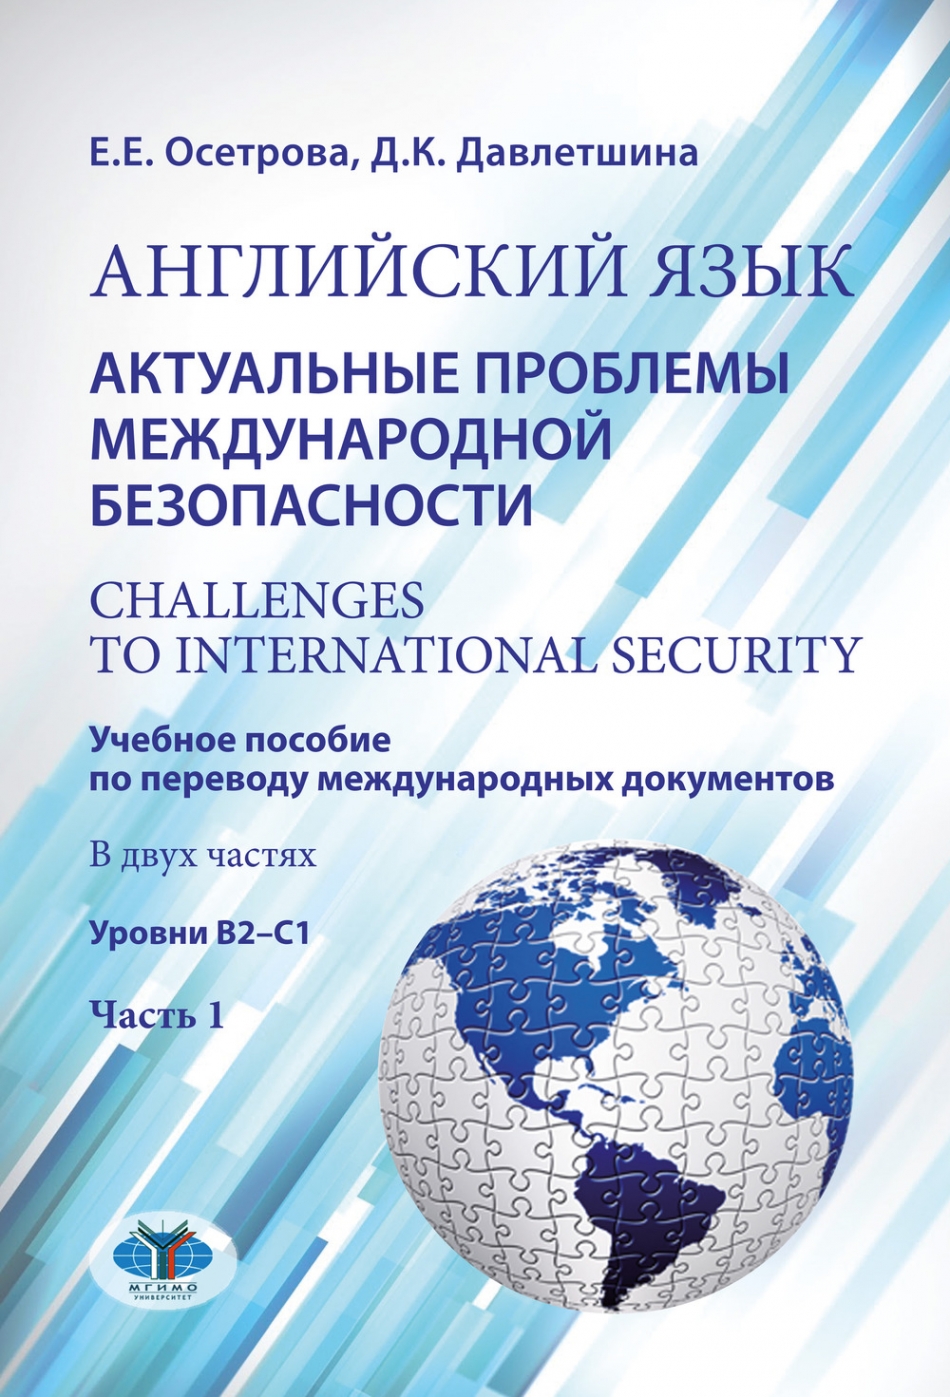 .. , ..   .    - = Challenges to international security.       .  21.  1 